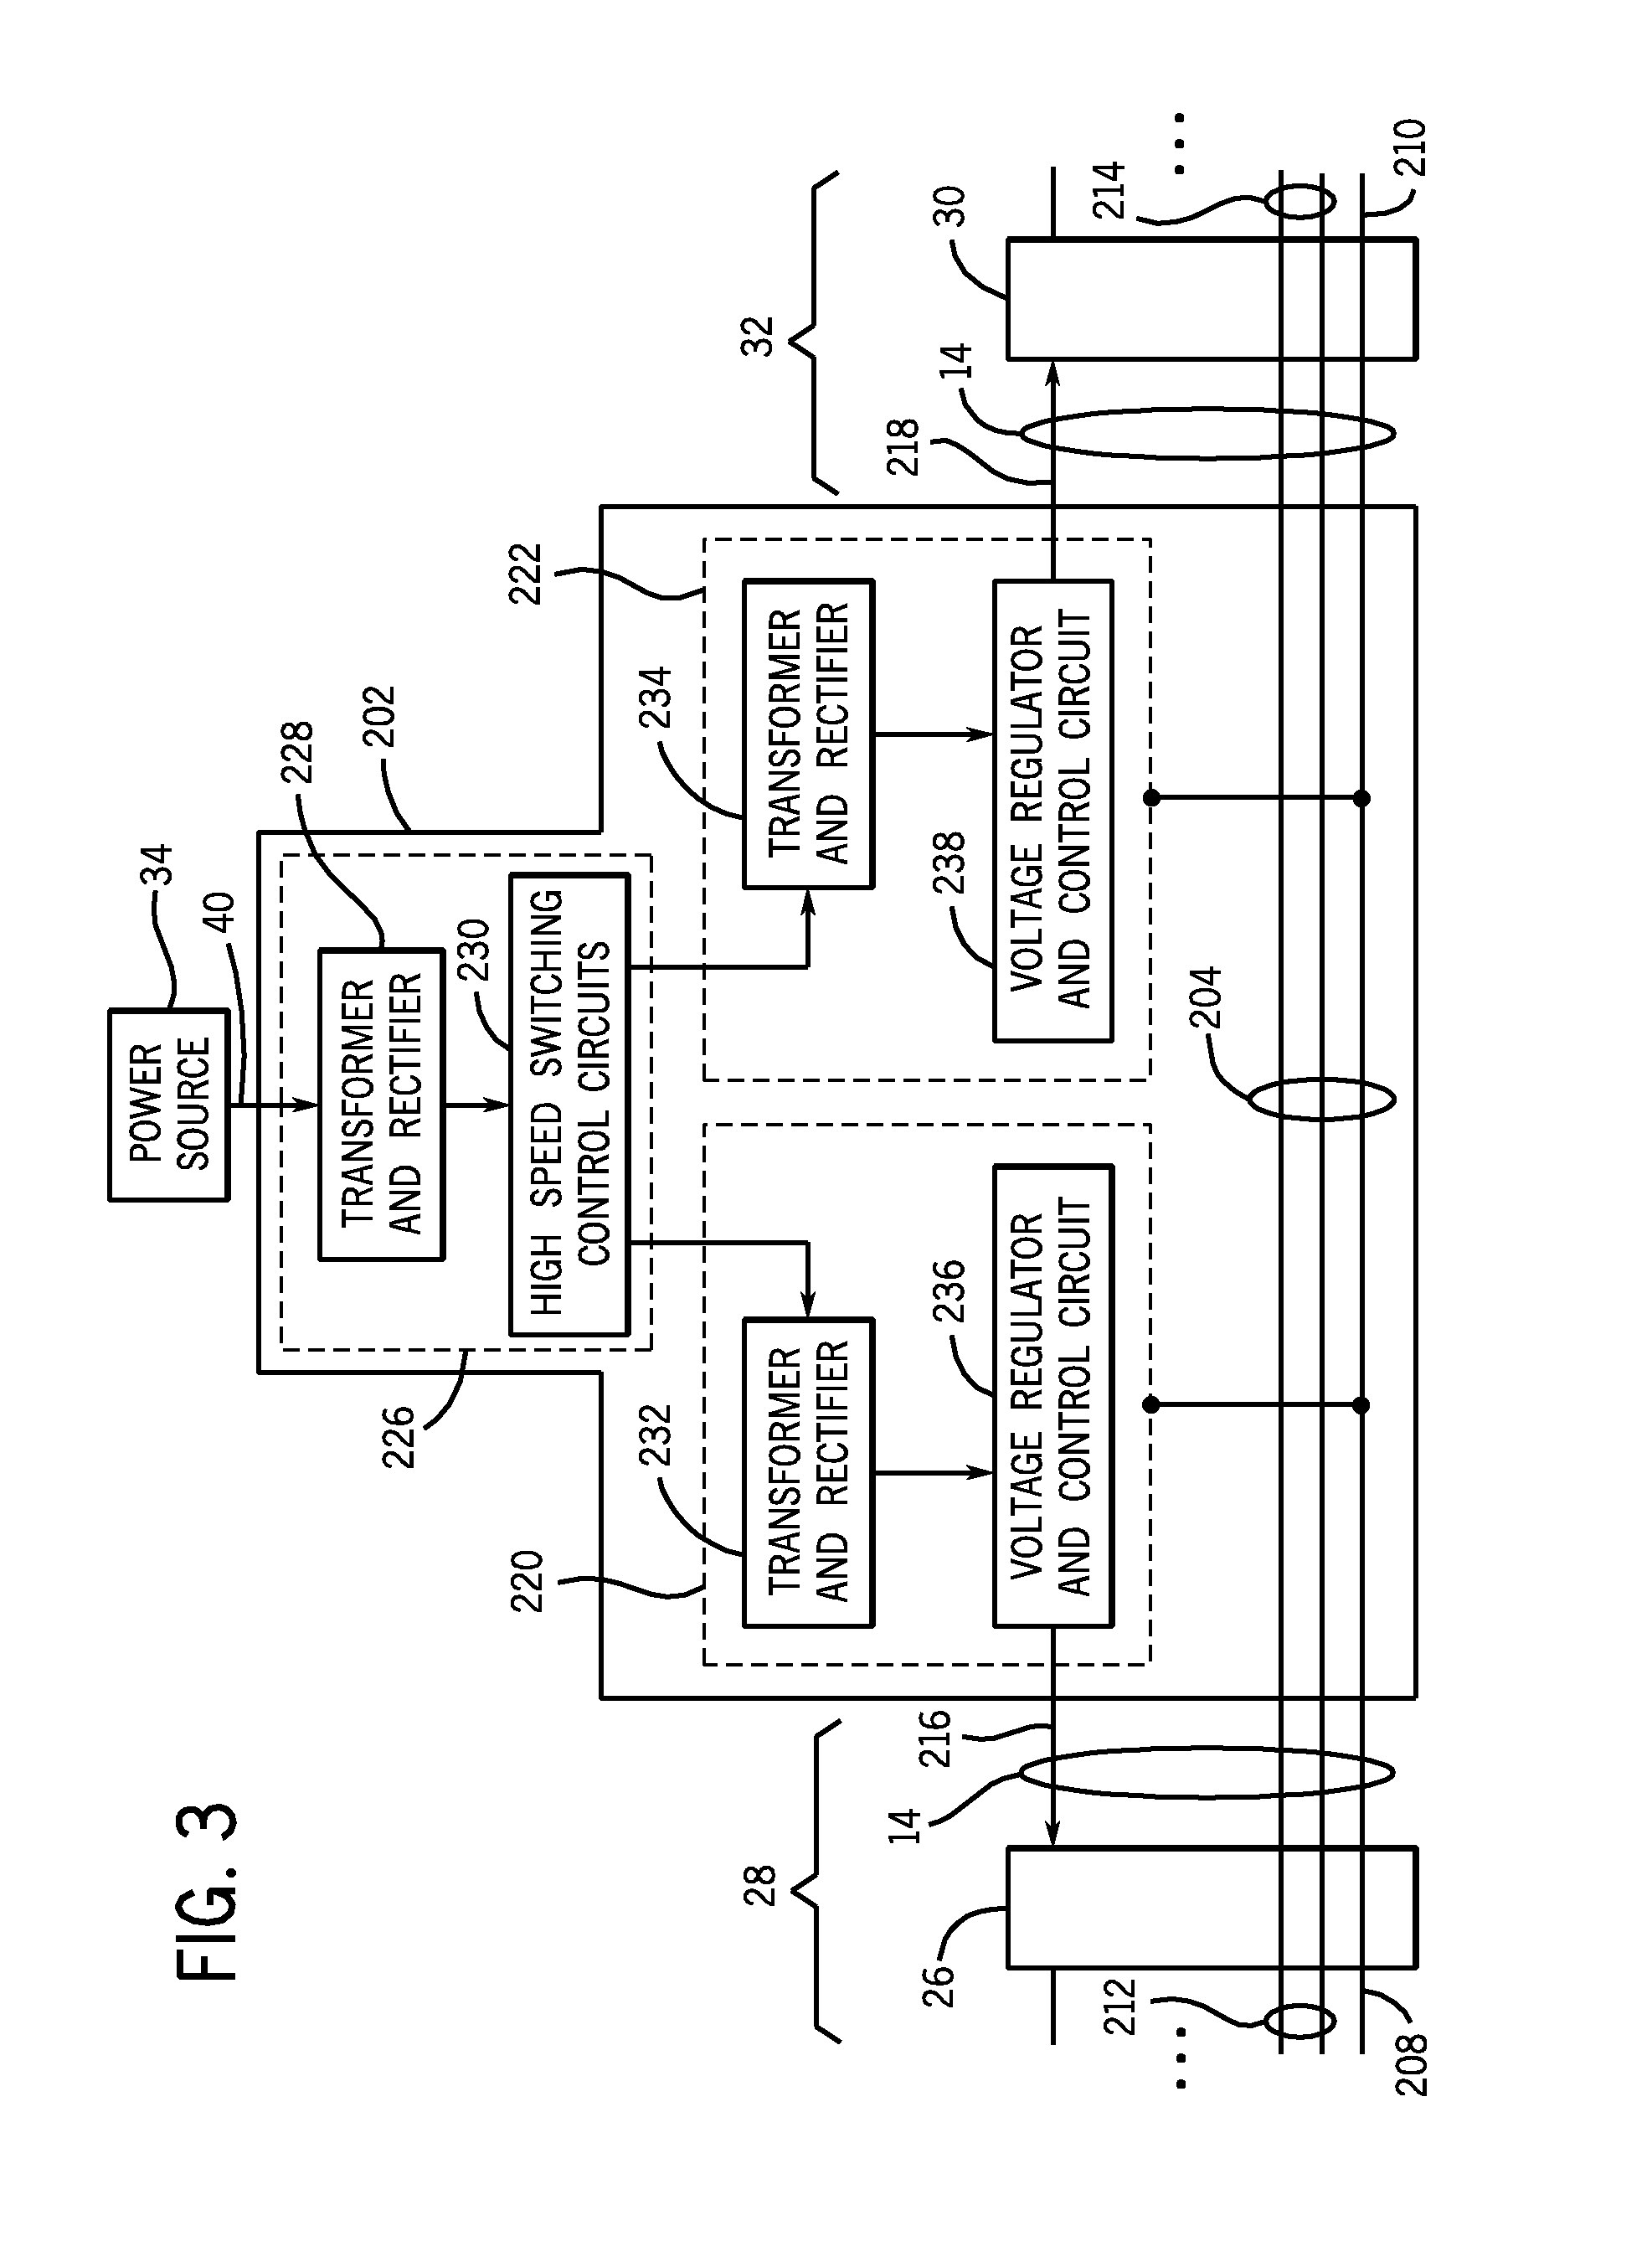 Single-input and dual-output power supply with integral coupling feature